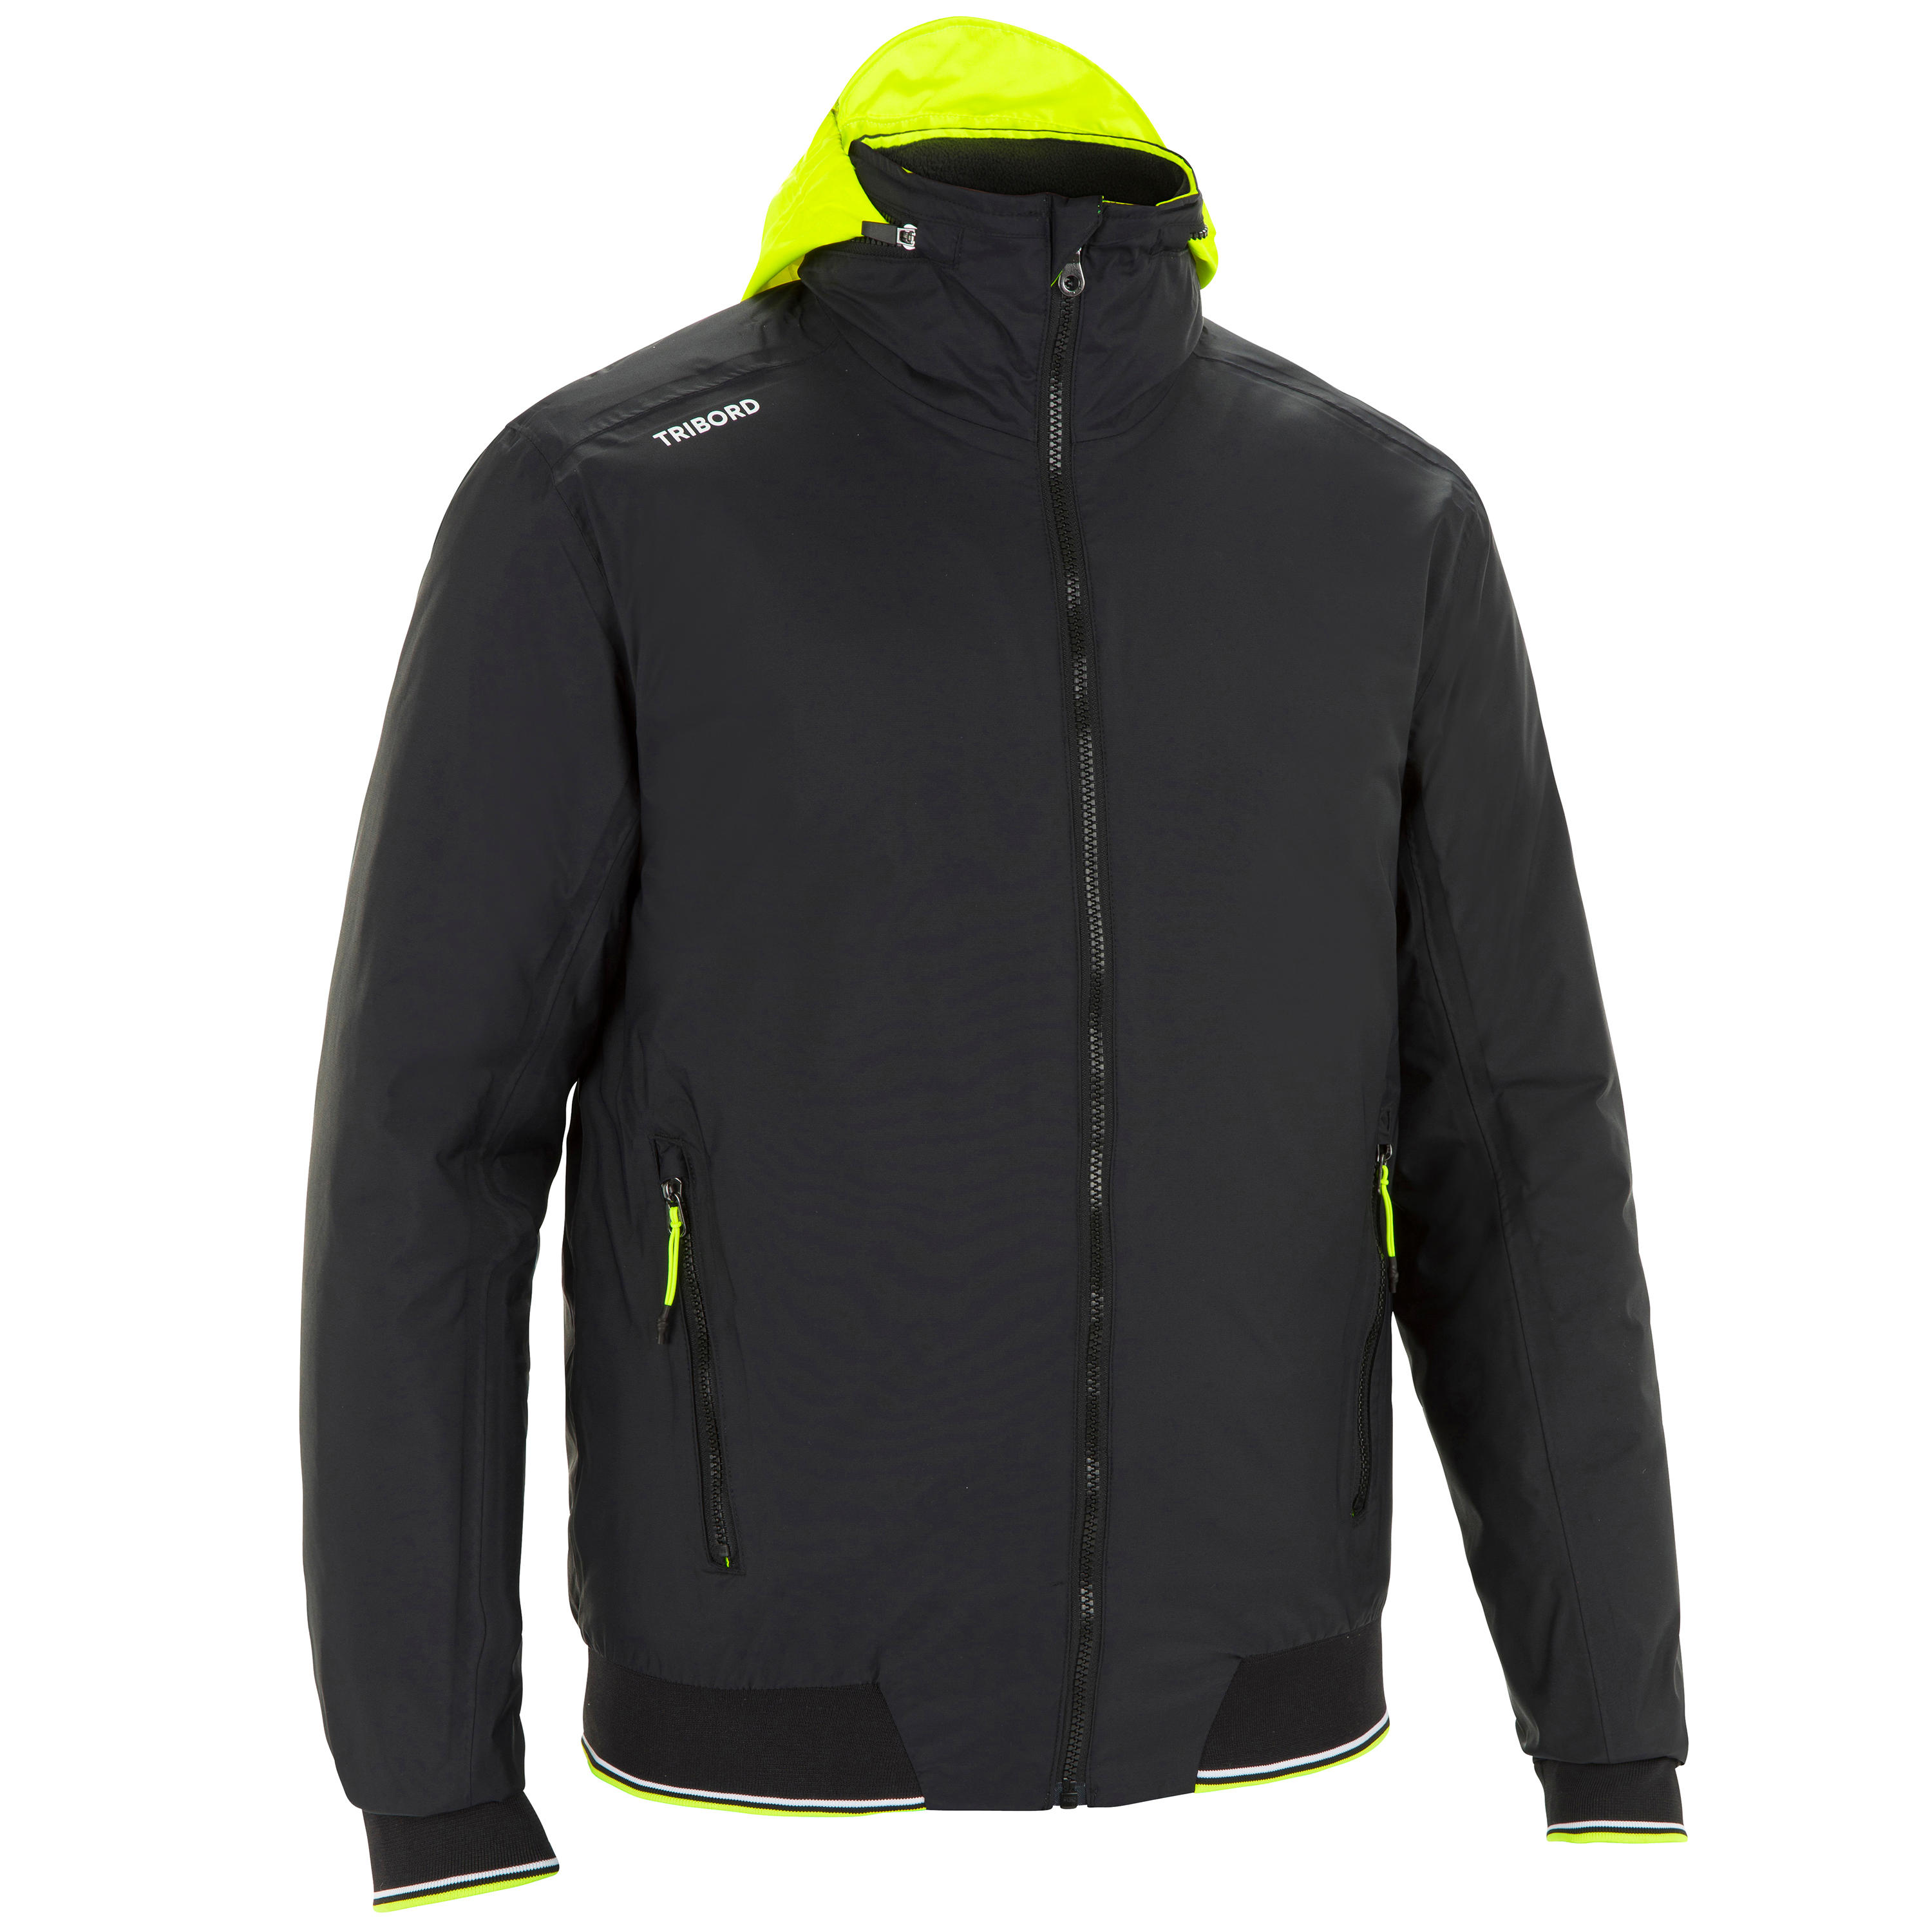 DOMYOS Men's Fitness Jacket By Decathlon - Buy DOMYOS Men's Fitness Jacket  By Decathlon Online at Best Prices in India on Snapdeal